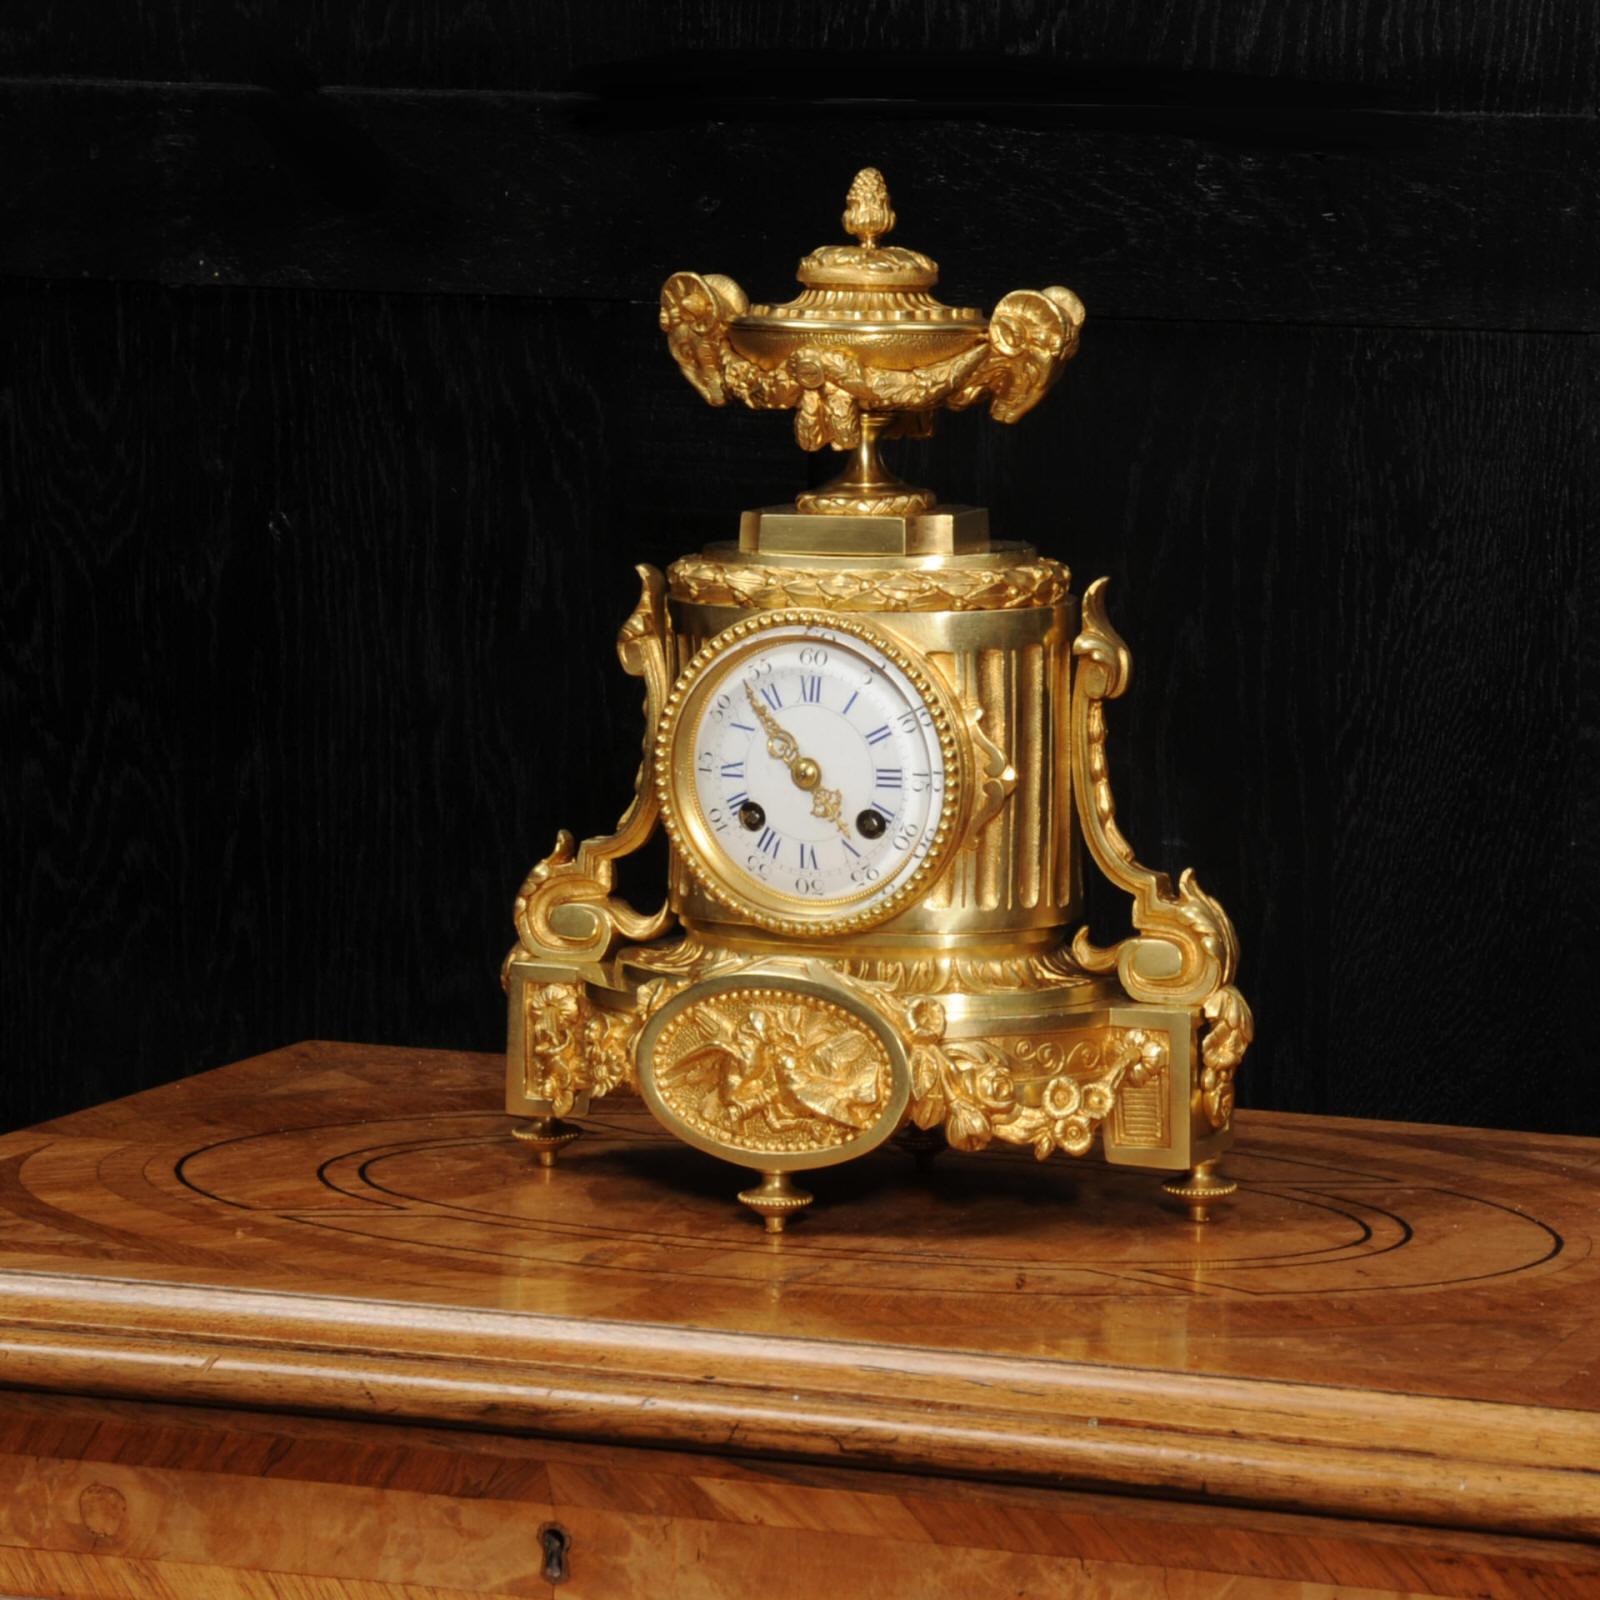 A superb Japy Frères antique French ormolu boudoir clock, circa 1860. It is classical in style with scrolls, acanthus panel with birds and a large urn with rams head handles to the top. The lid of the urn opens for storage of small items. The ormolu